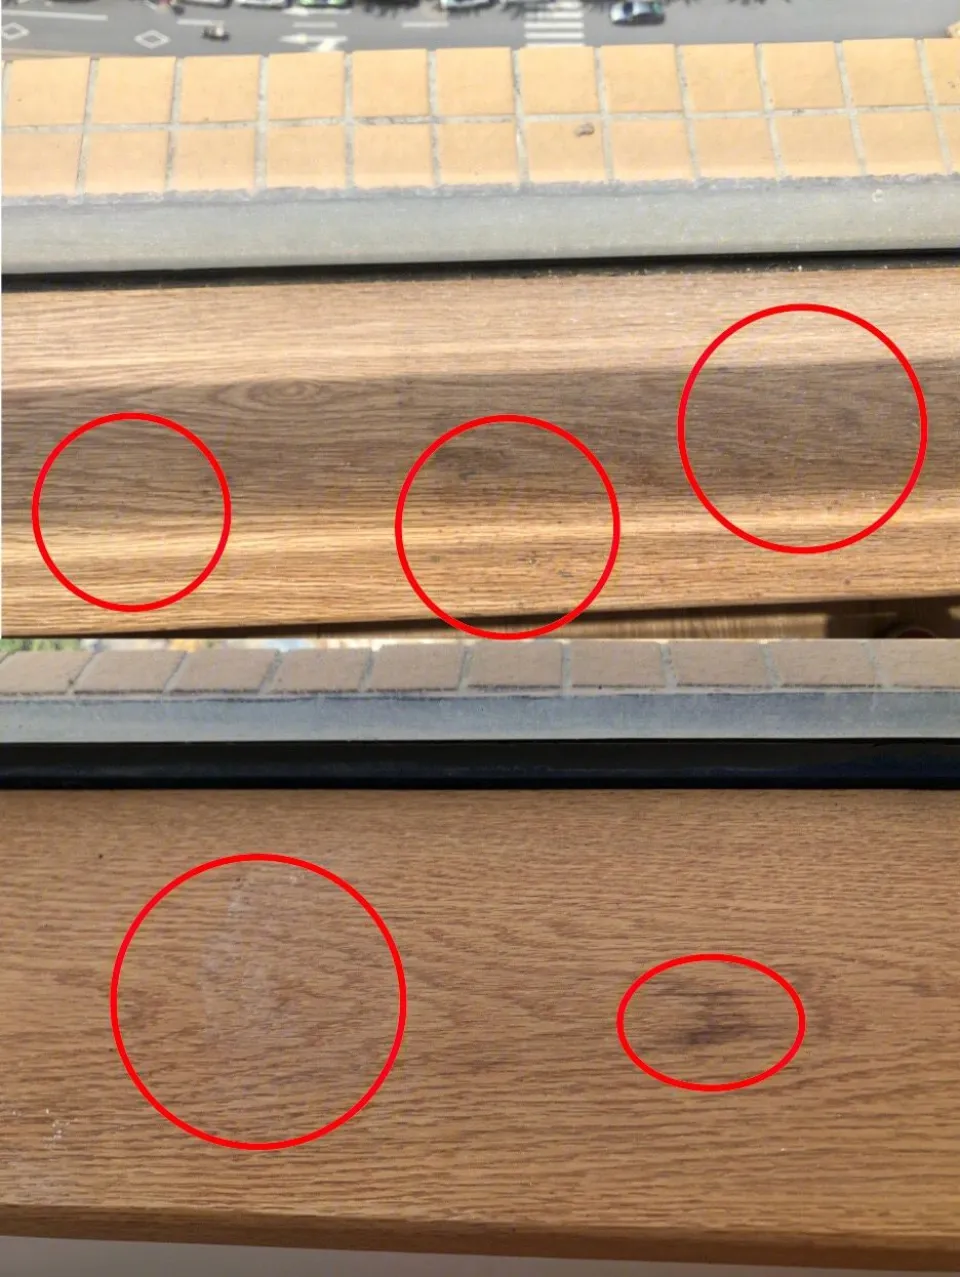 How to Fix Water-Damaged Furniture - Can Wet Wood be Repaired?